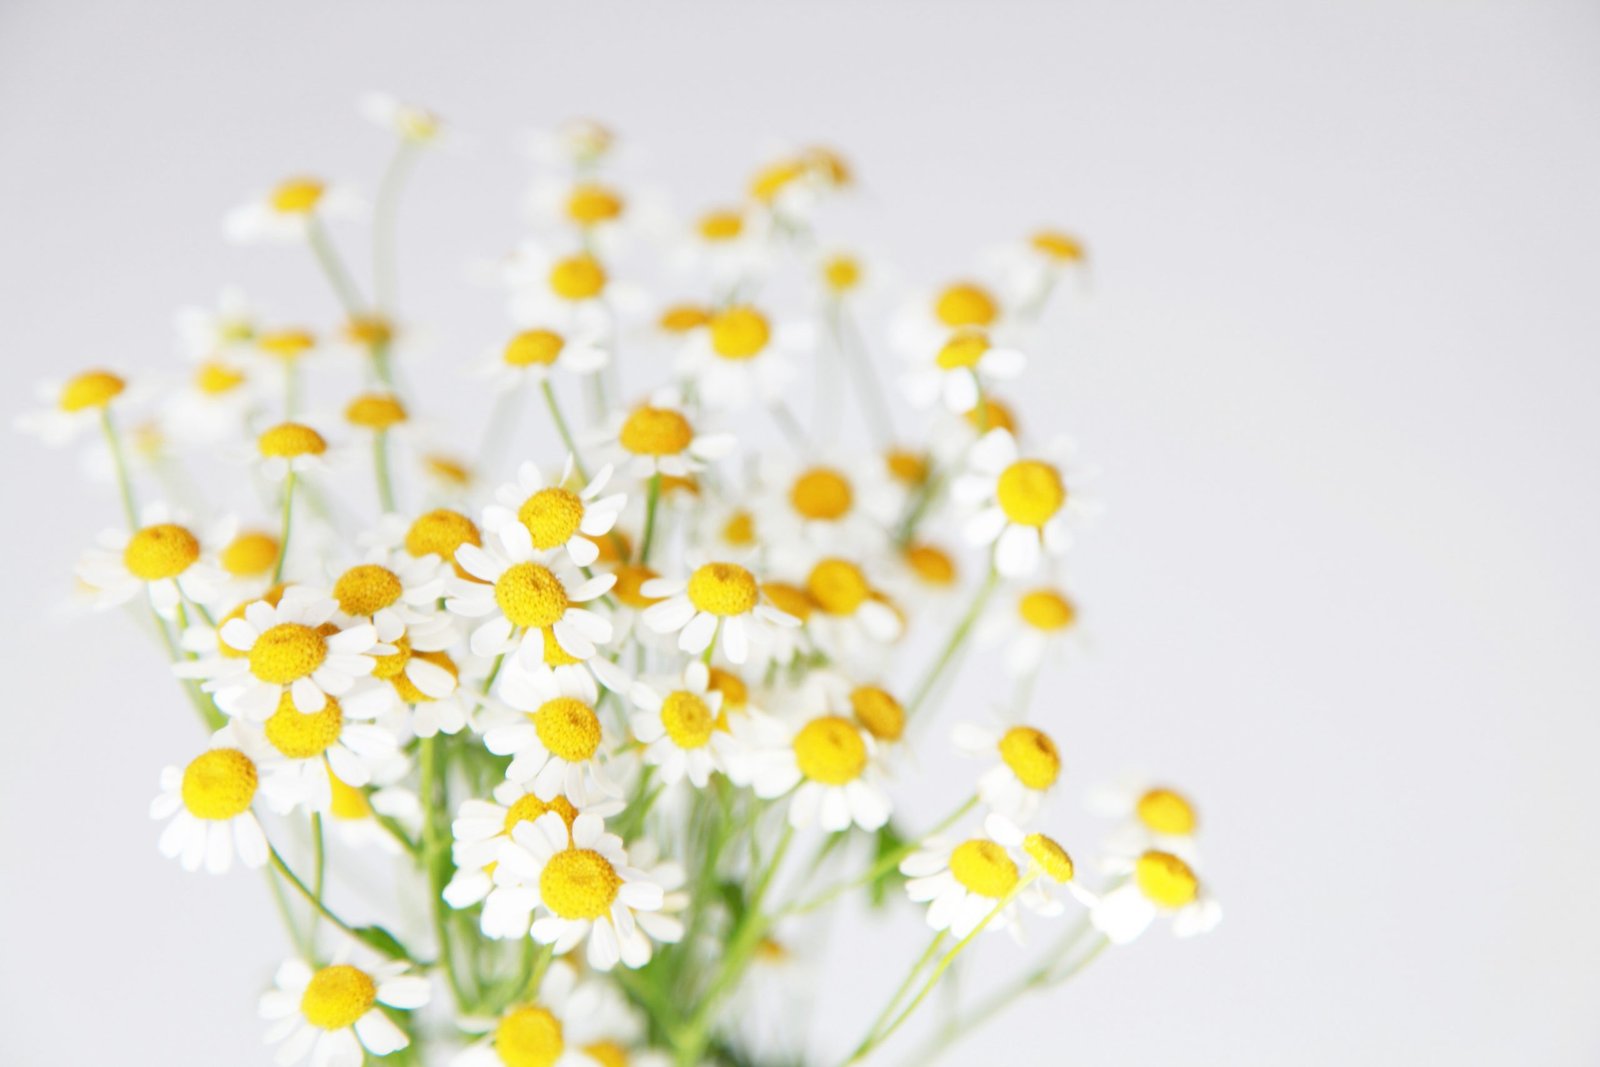 10 Simple Herbal Remedies From Your Garden - German Chamomile